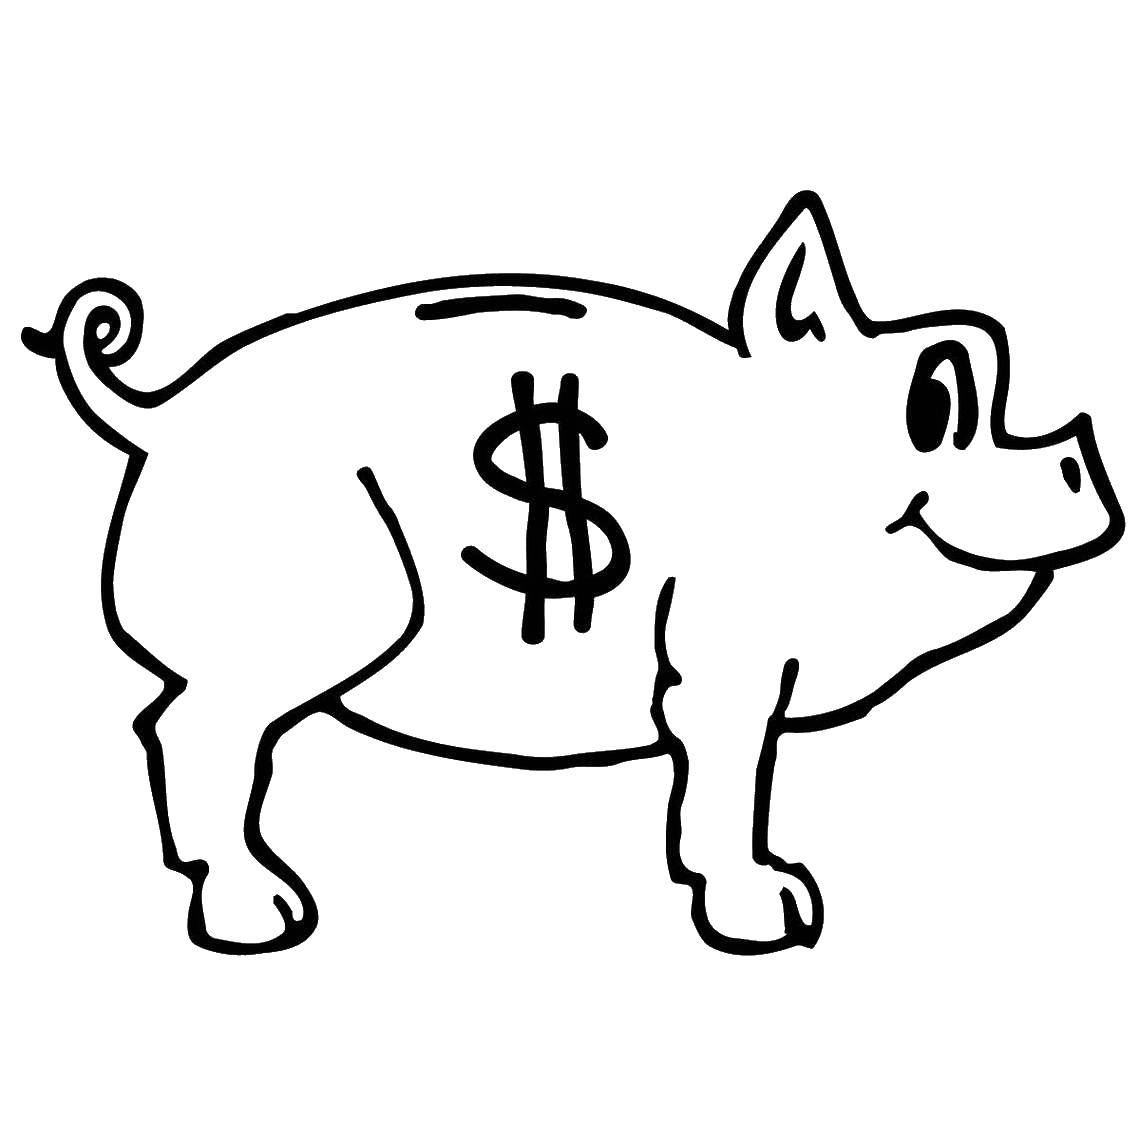 Coloring Pig with dollar. Category The outline of a pig to cut. Tags:  the pig and the dollar.